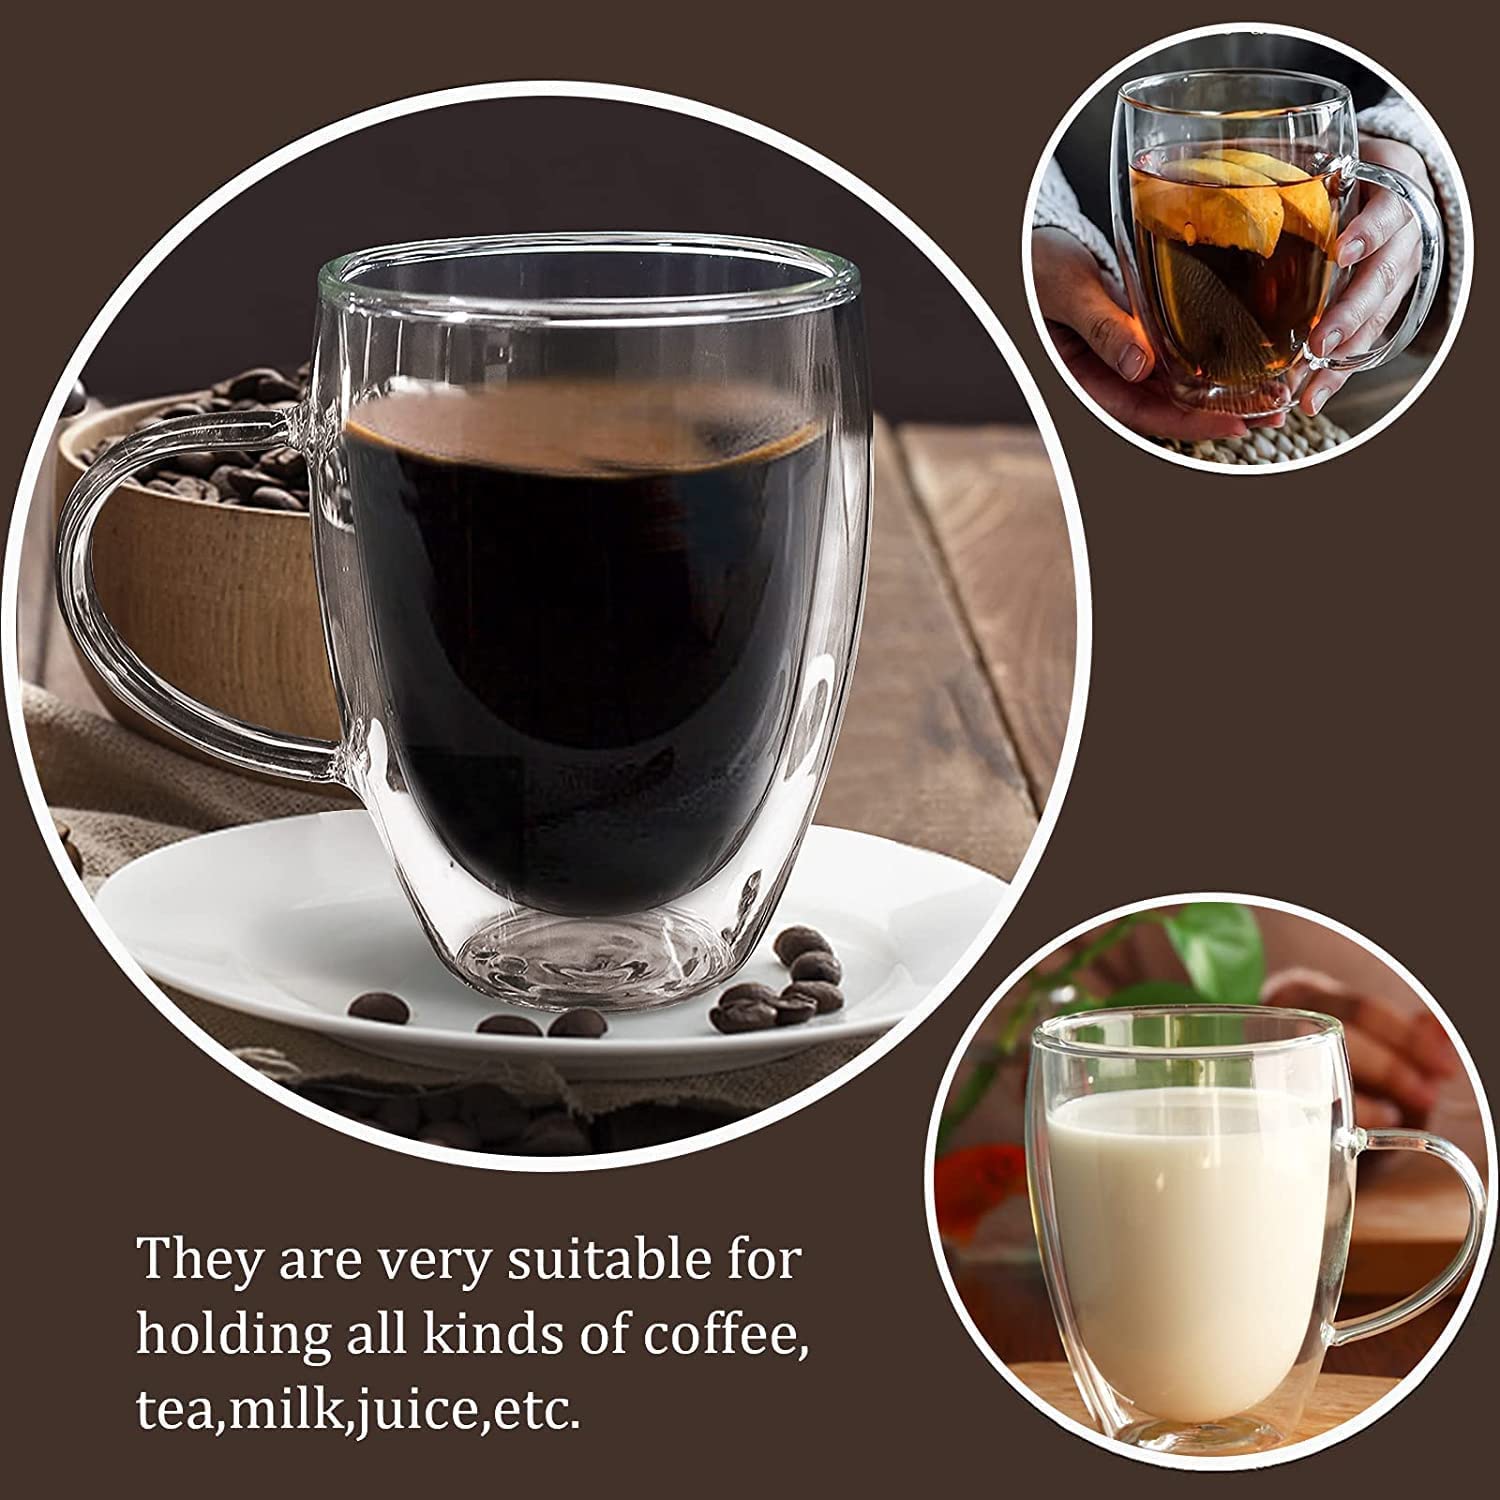 15 Oz Double Walled Glass Coffee Mugs, 2 Packs Clear Coffee Mugs with Lids Insulated Coffee Cups with Handle Perfect for Cappuccino,Tea,milk ,Espresso,Latte, Hot Beverage Set of 2 (Glass lid, 15oz)